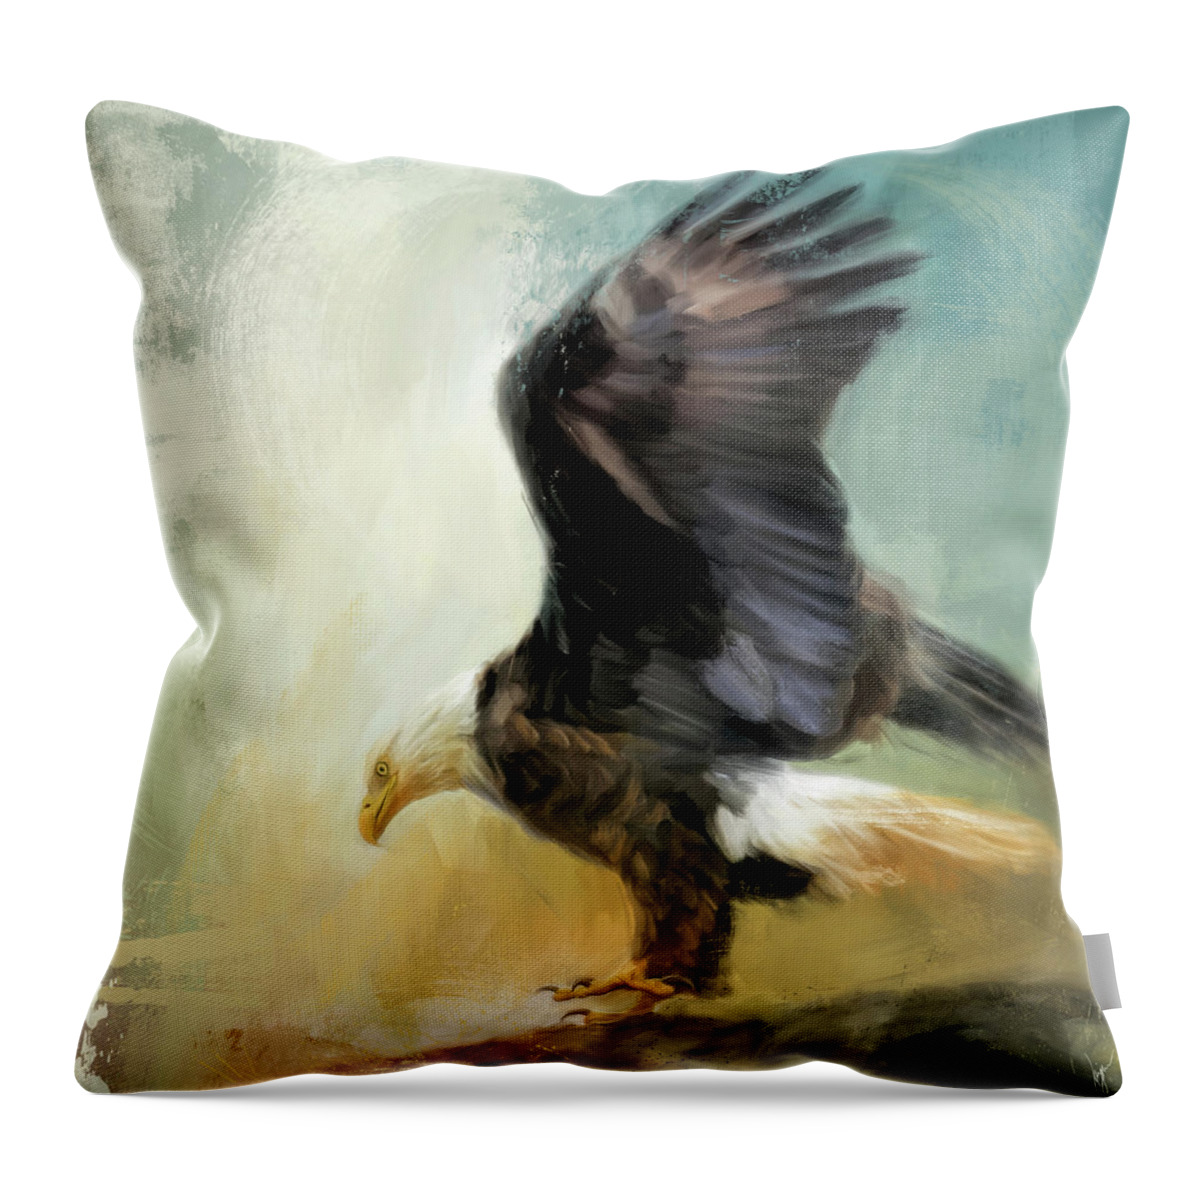 Colorful Throw Pillow featuring the painting Dance Of The Bald Eagle by Jai Johnson